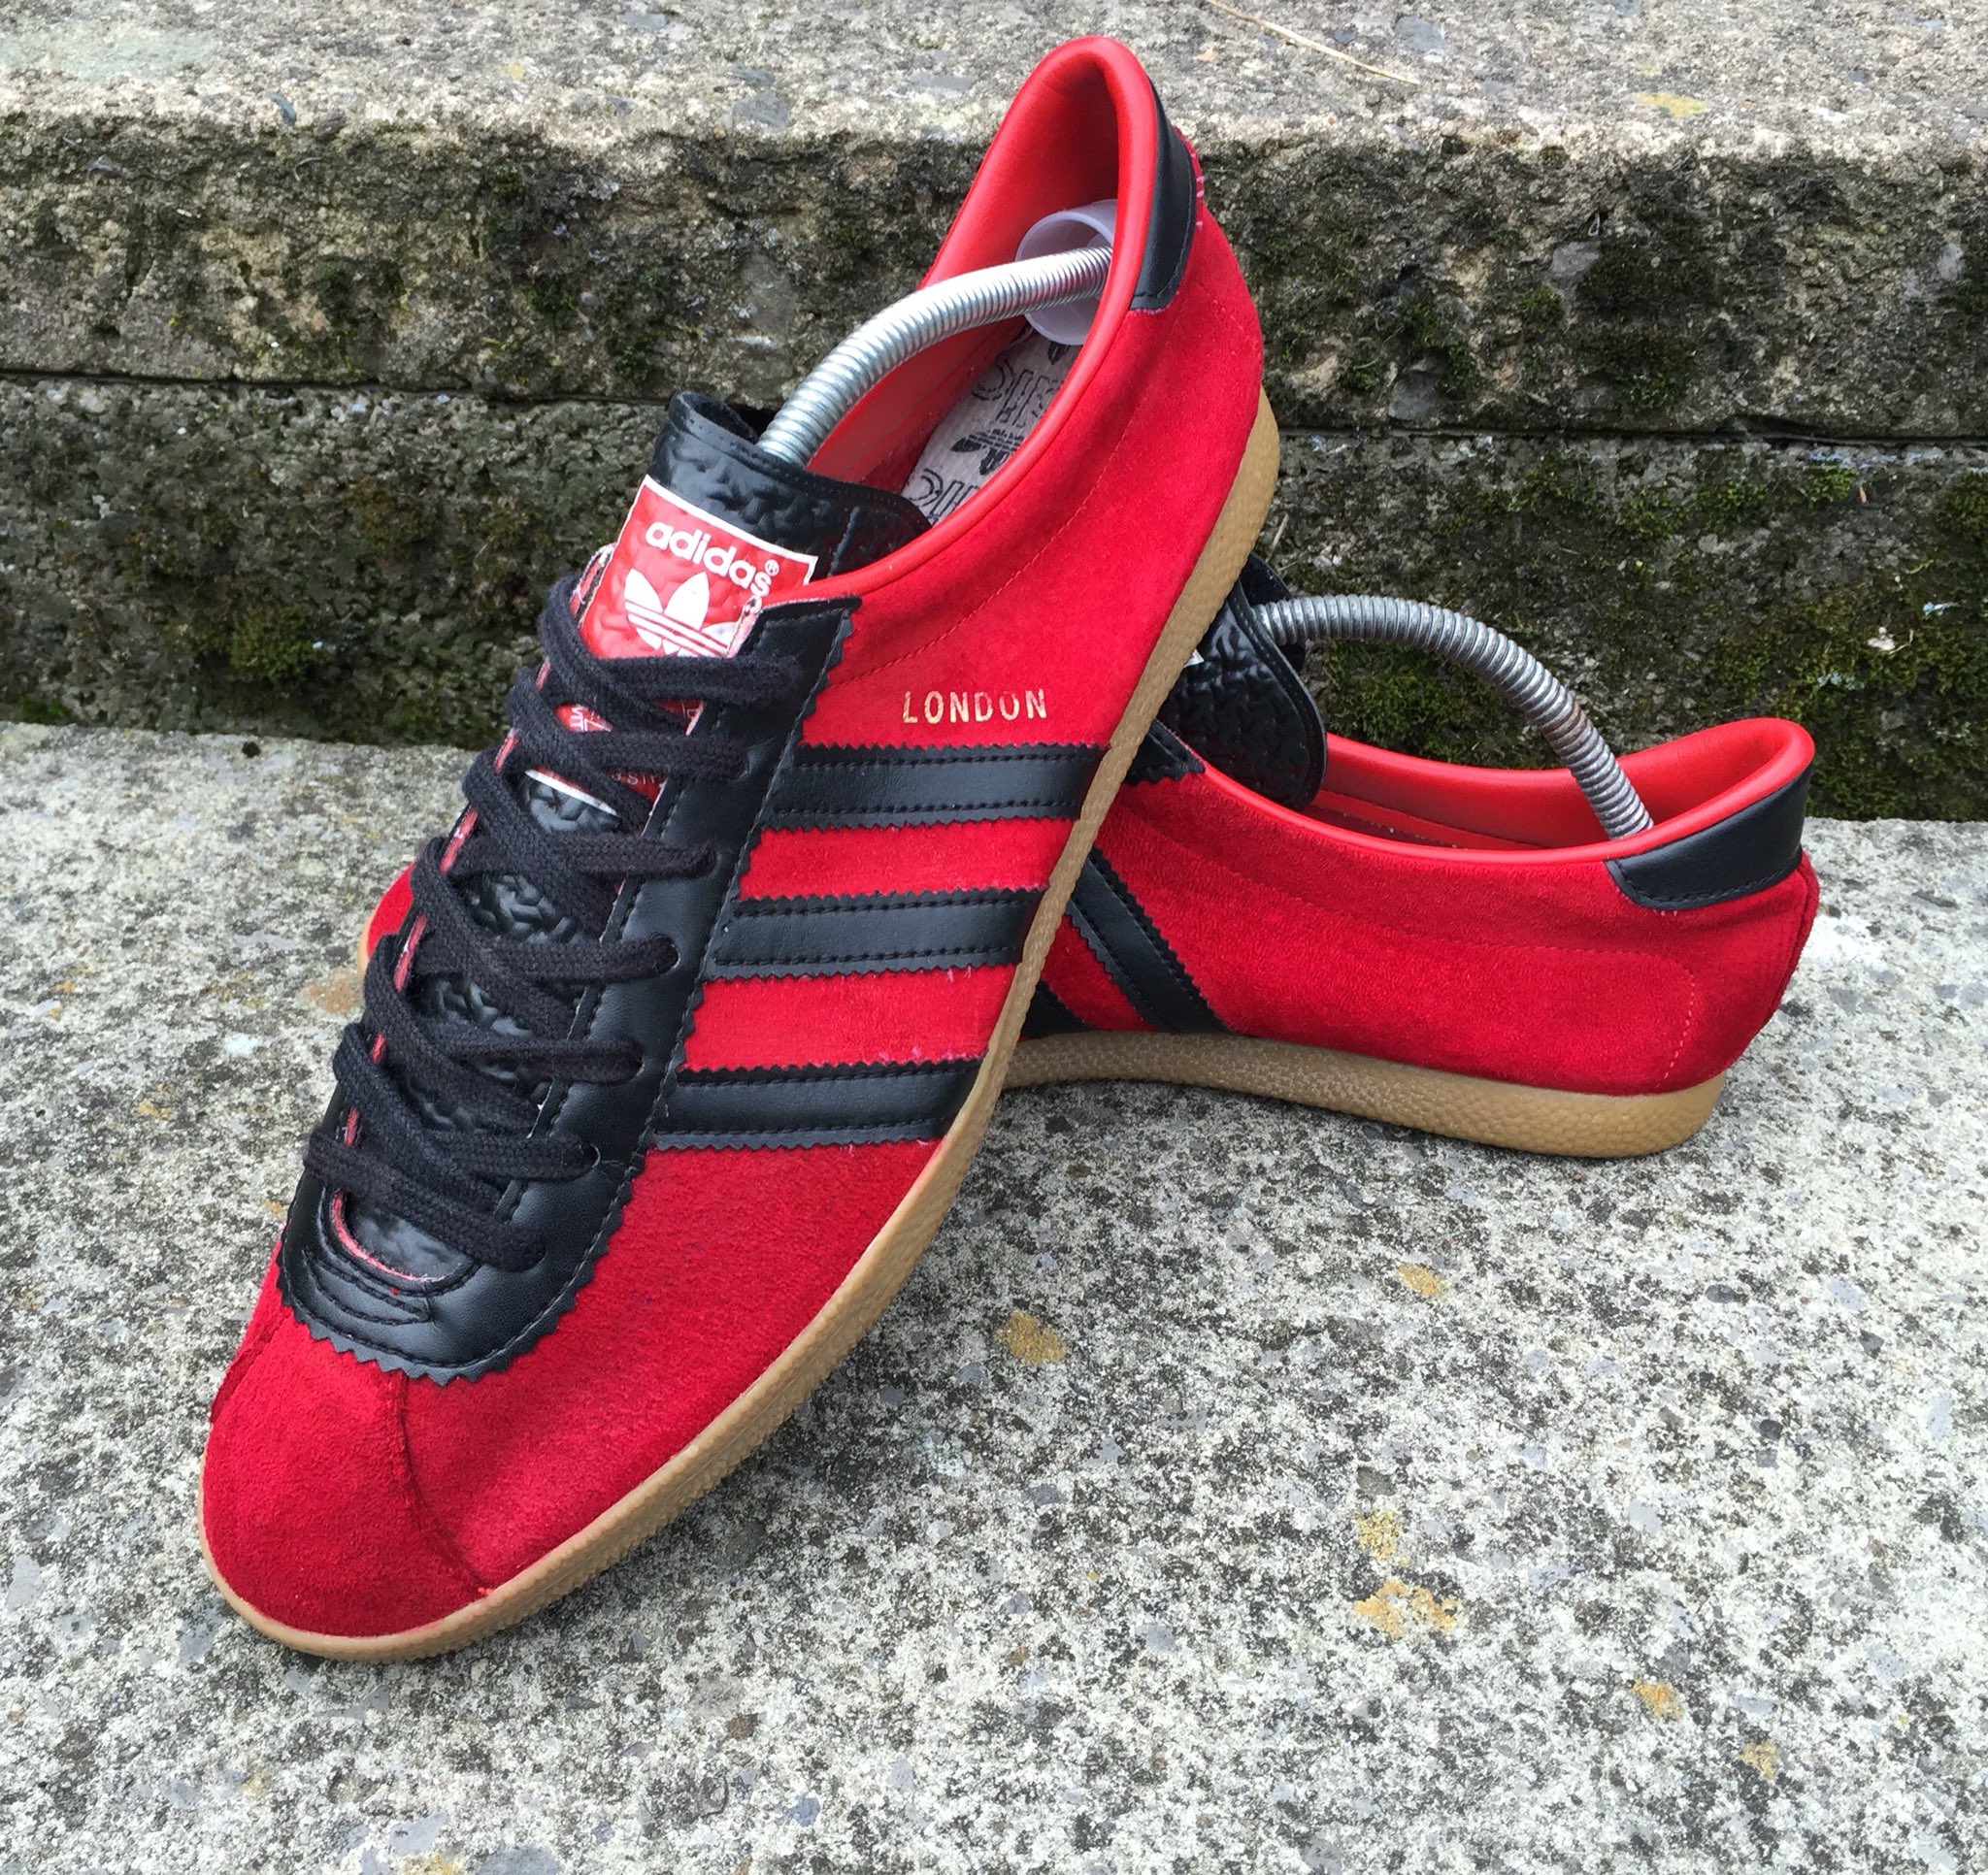 Trainers Reborn on Twitter: "Adidas #London after a re dye. Much better  shade of red on these now! @DeadstockUtopia https://t.co/NkNaBOe8R5" /  Twitter